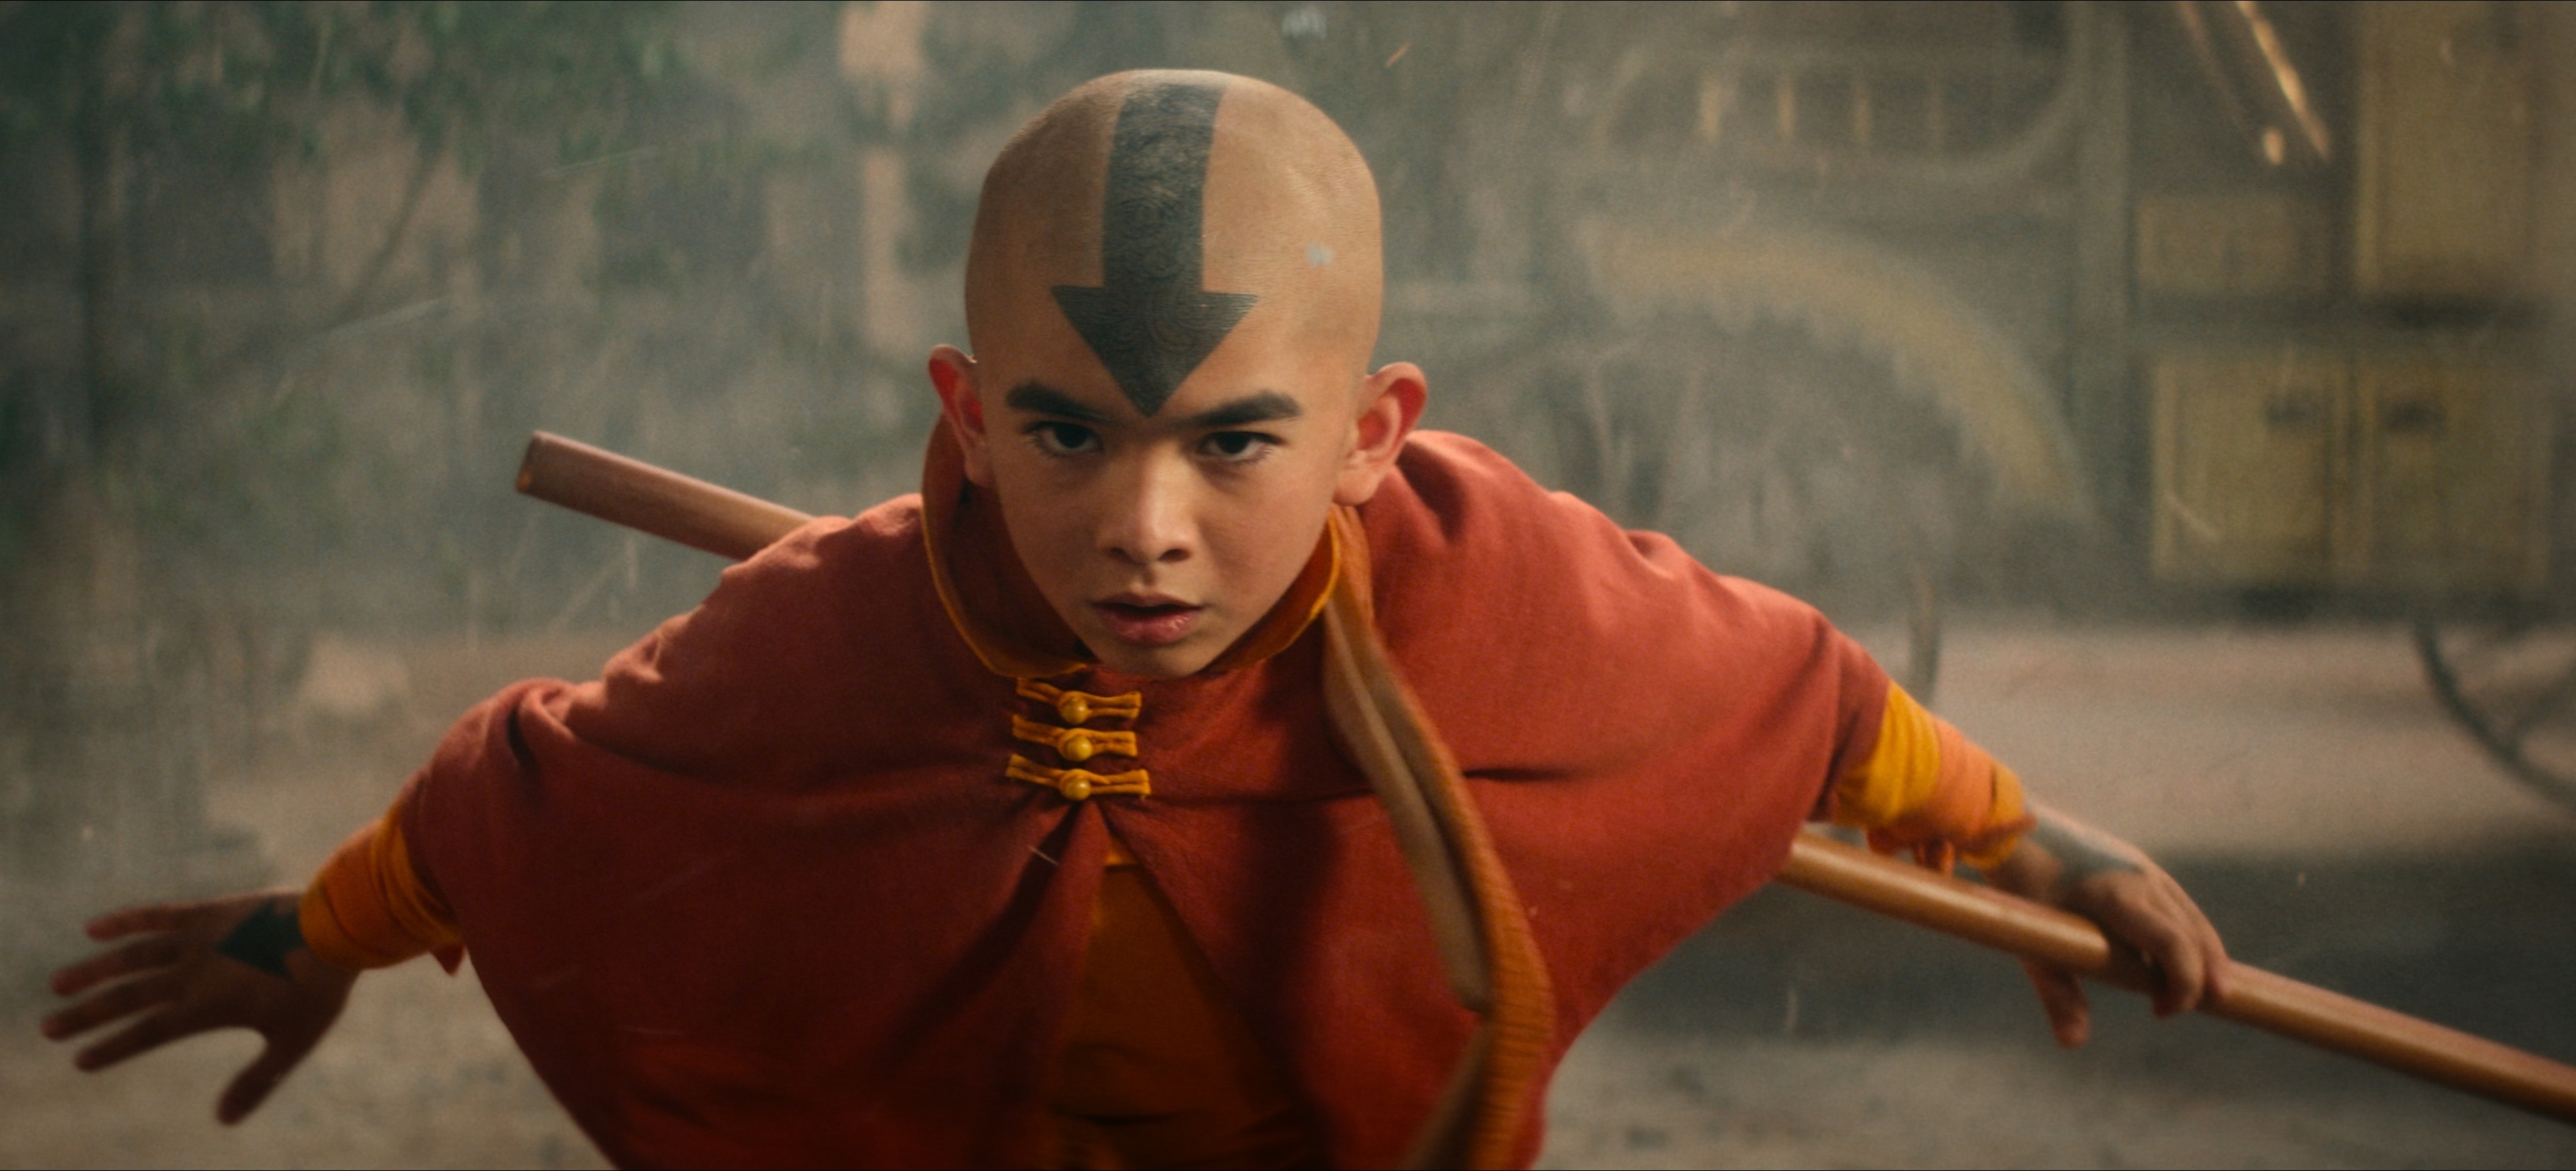 Aang from Avatar: The Last Airbender in action pose, holding a staff, dressed in traditional Air Nomad attire